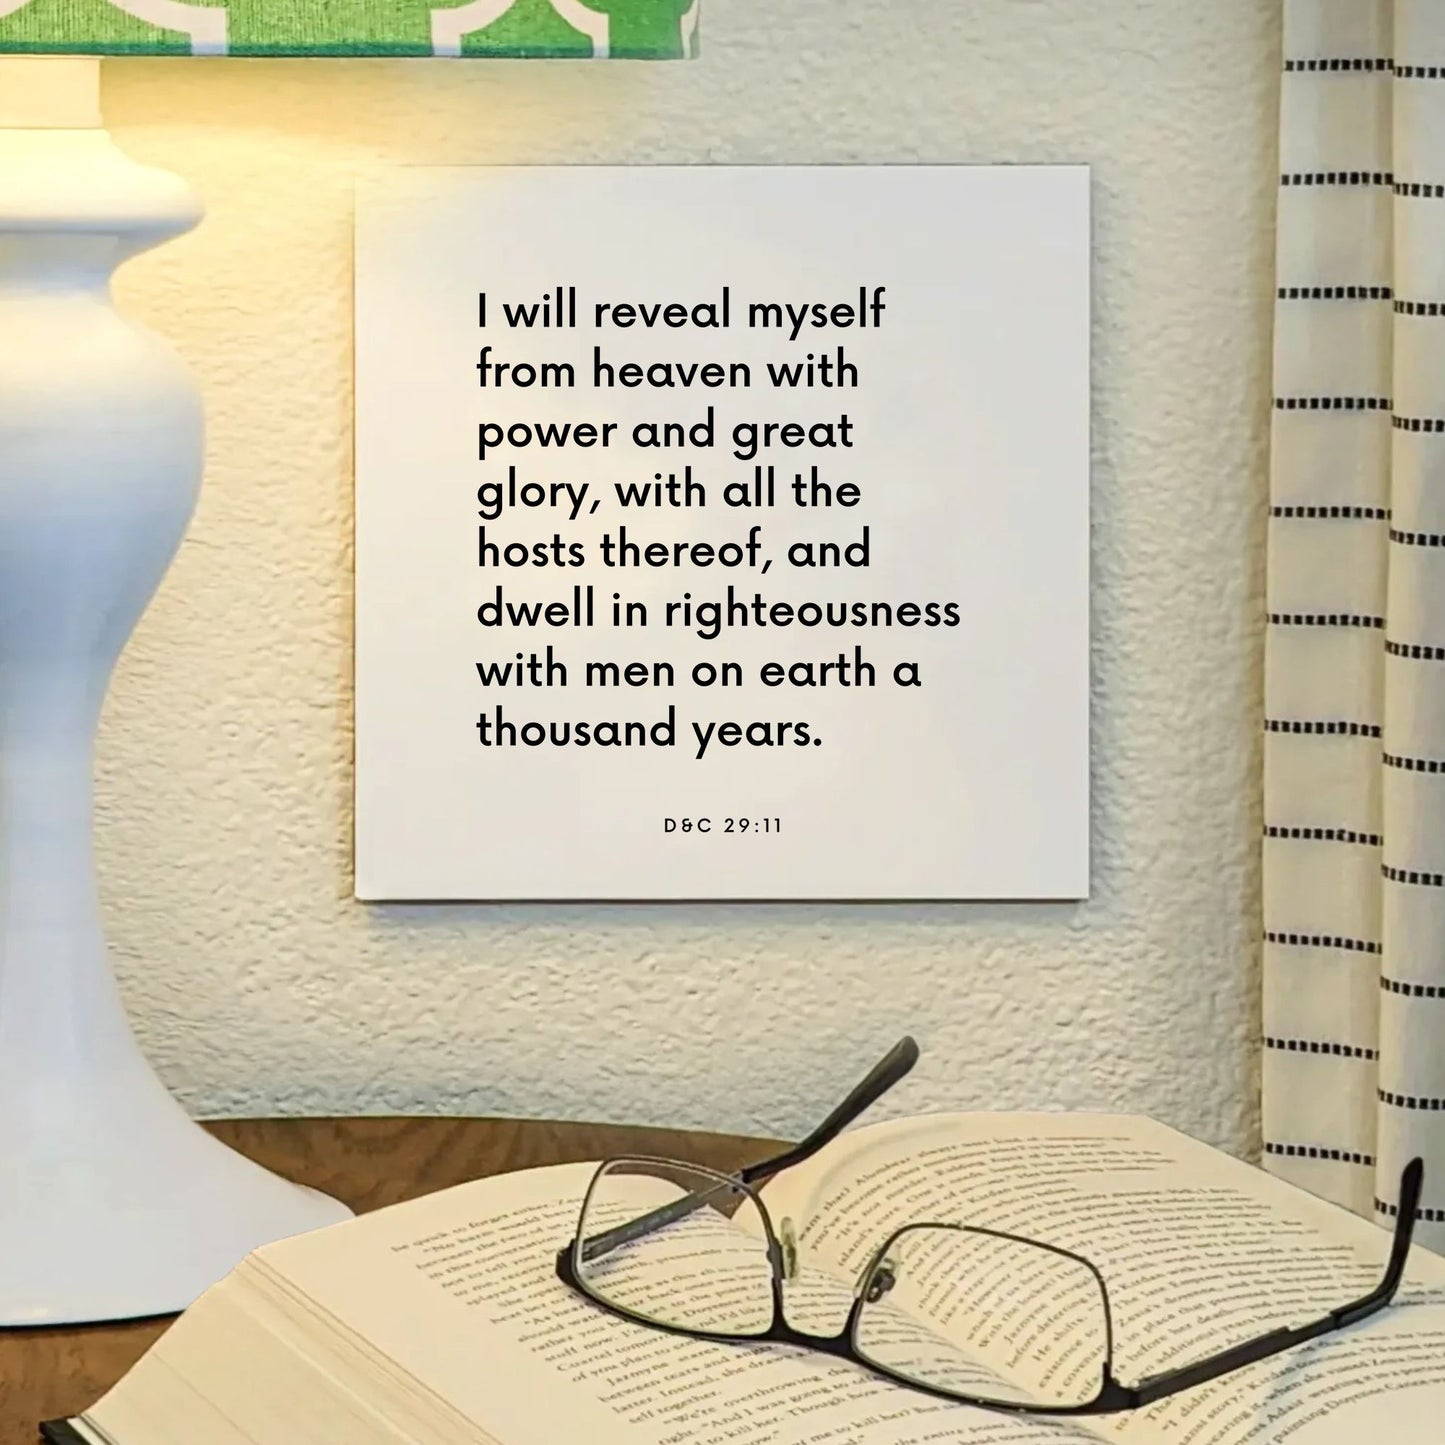 Lamp mouting of the scripture tile for D&C 29:11 - "I will reveal myself from heaven"